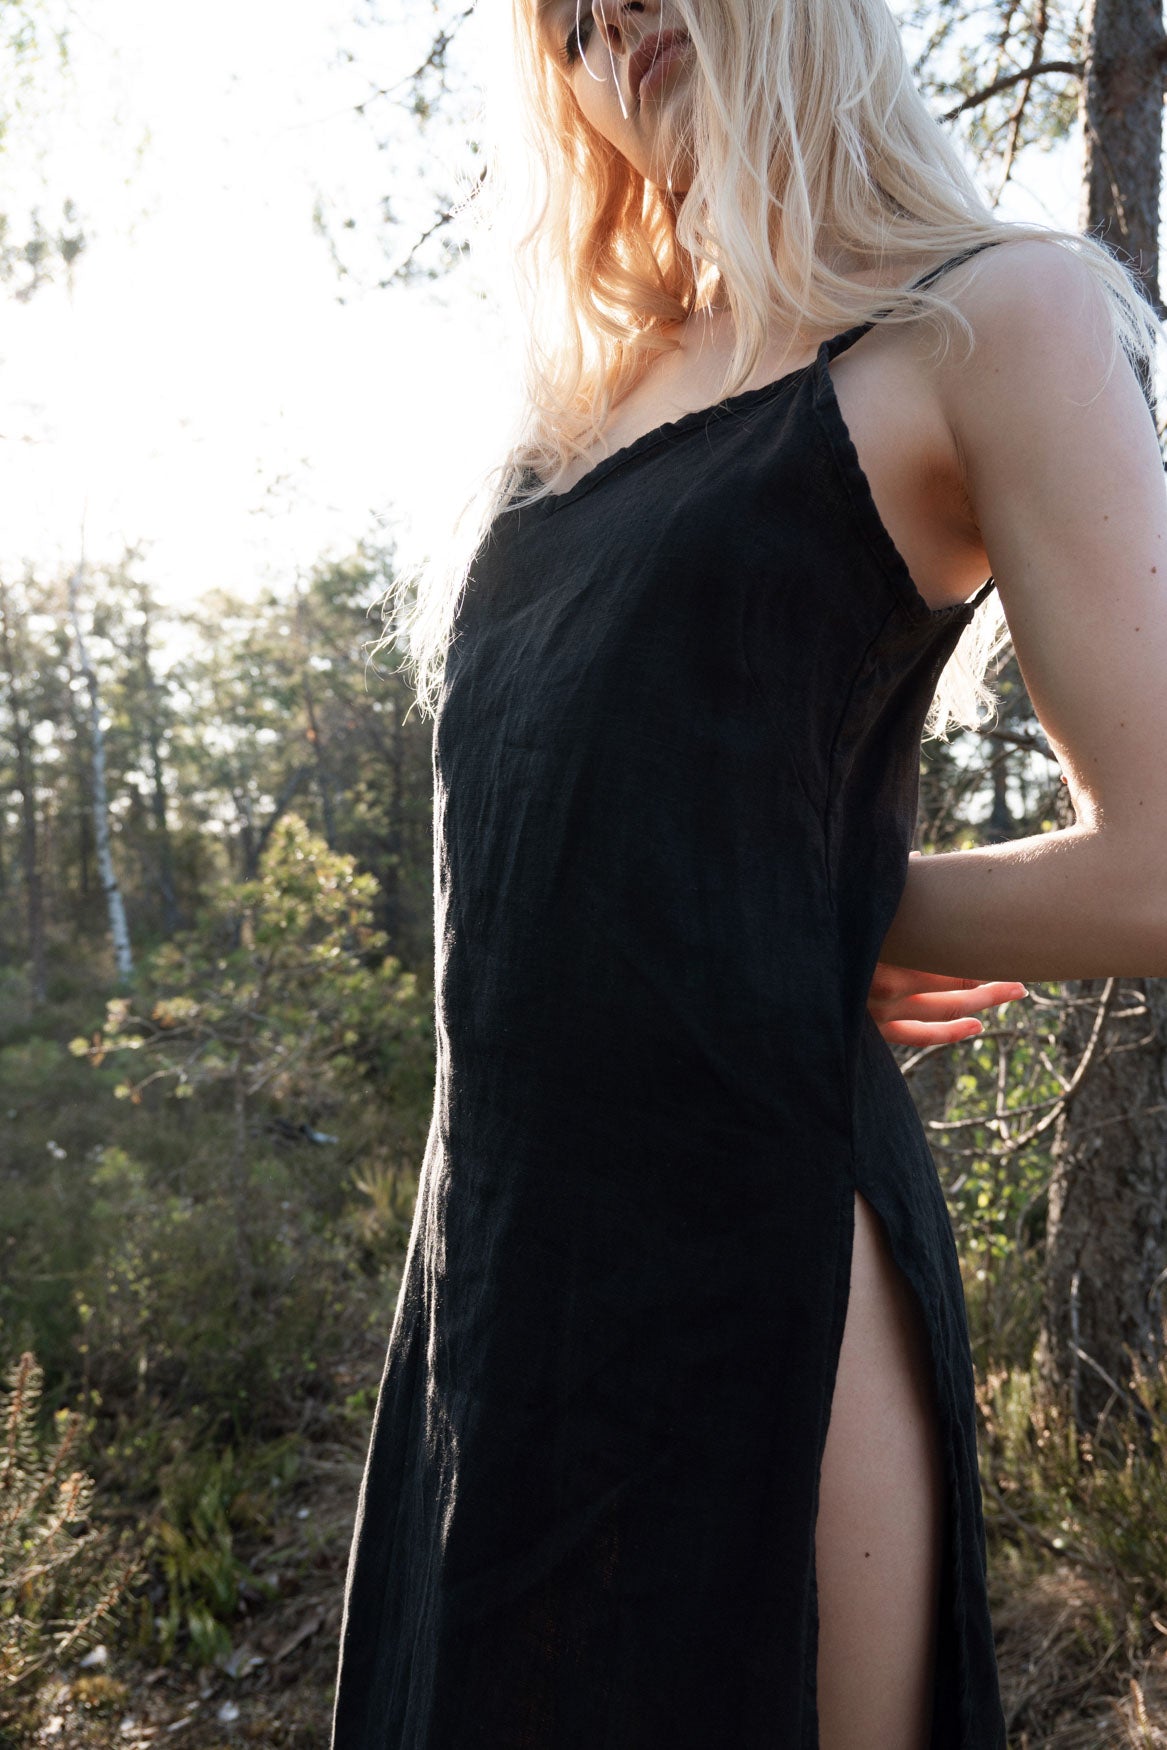 Organic, sustainable, sexy, long black linen nightwear slip dress with spaghetti straps and splits. This linen lingerie nightdress is natural, comfortable, soft and pure. This sleepwear nightgown is a conscious and healthy choice for your body and environment.